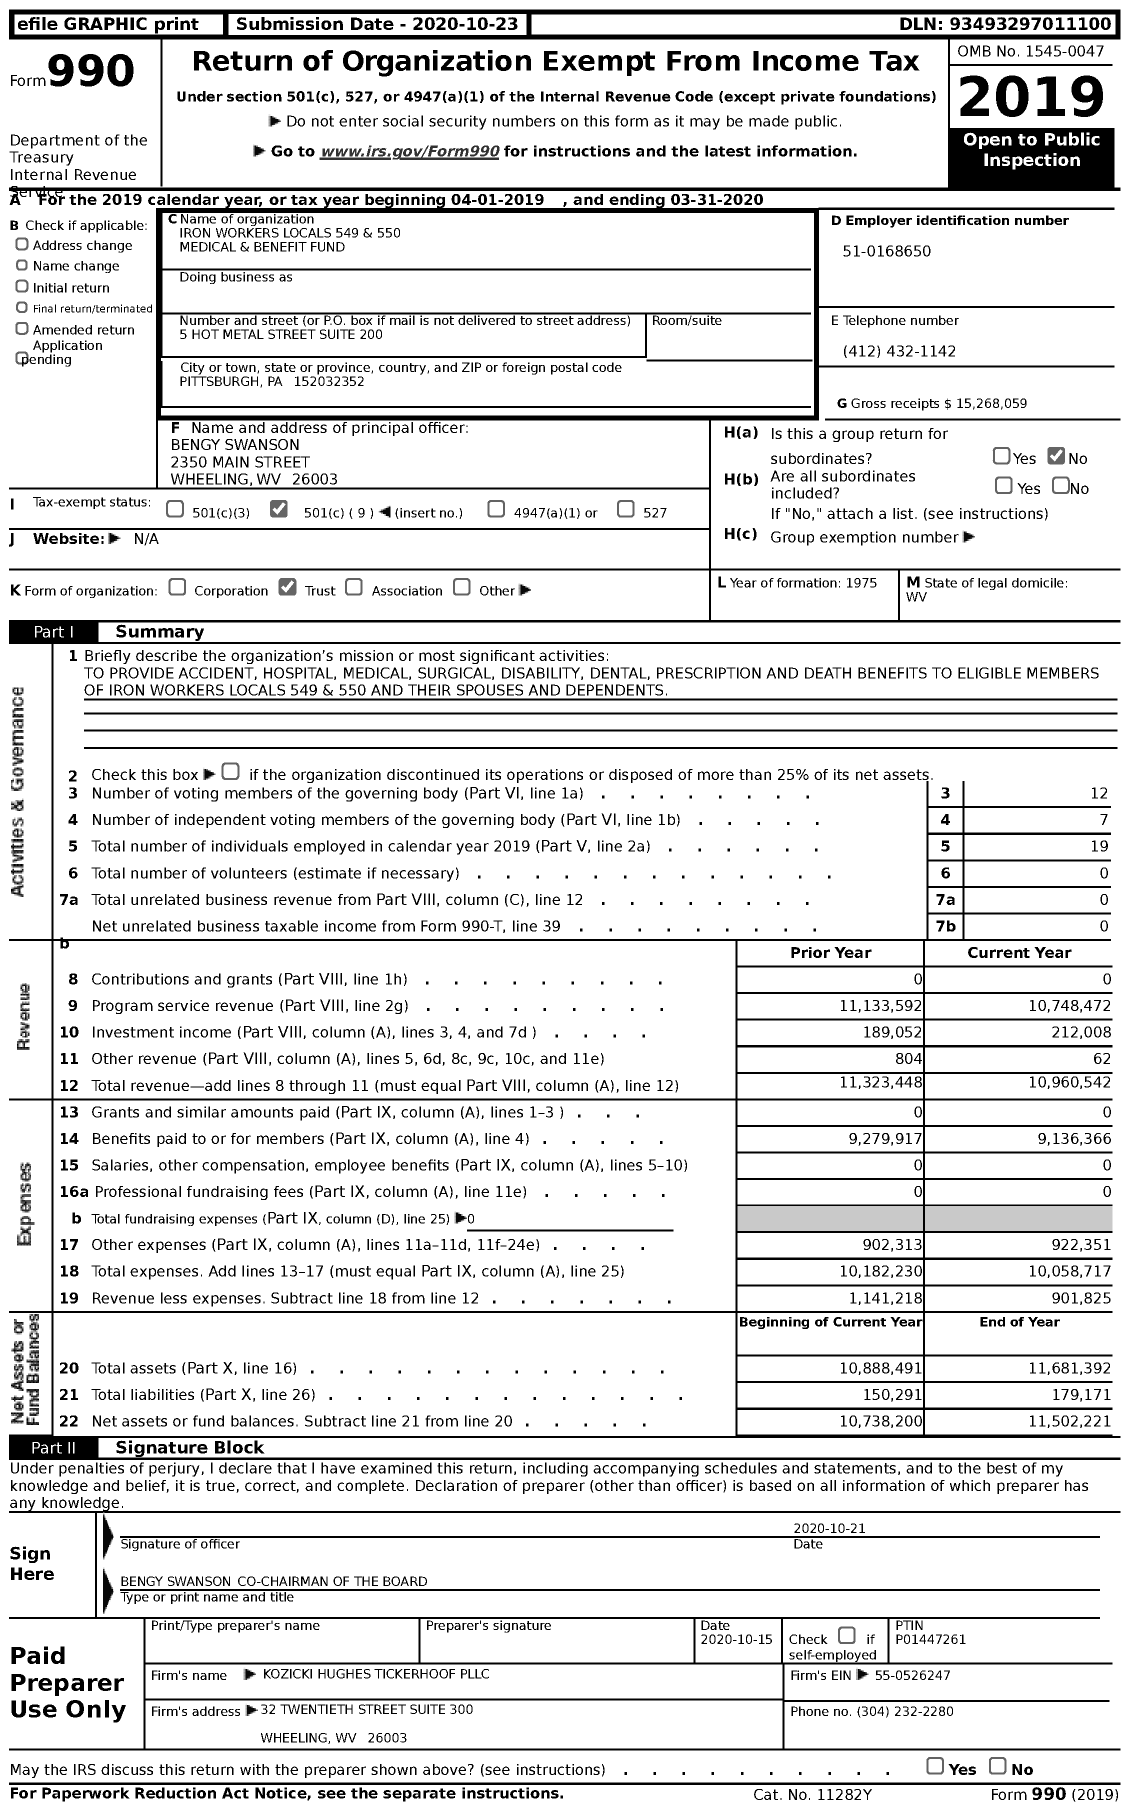 Image of first page of 2019 Form 990 for Iron Workers Locals 549 and 550 Medical and Benefit Fund